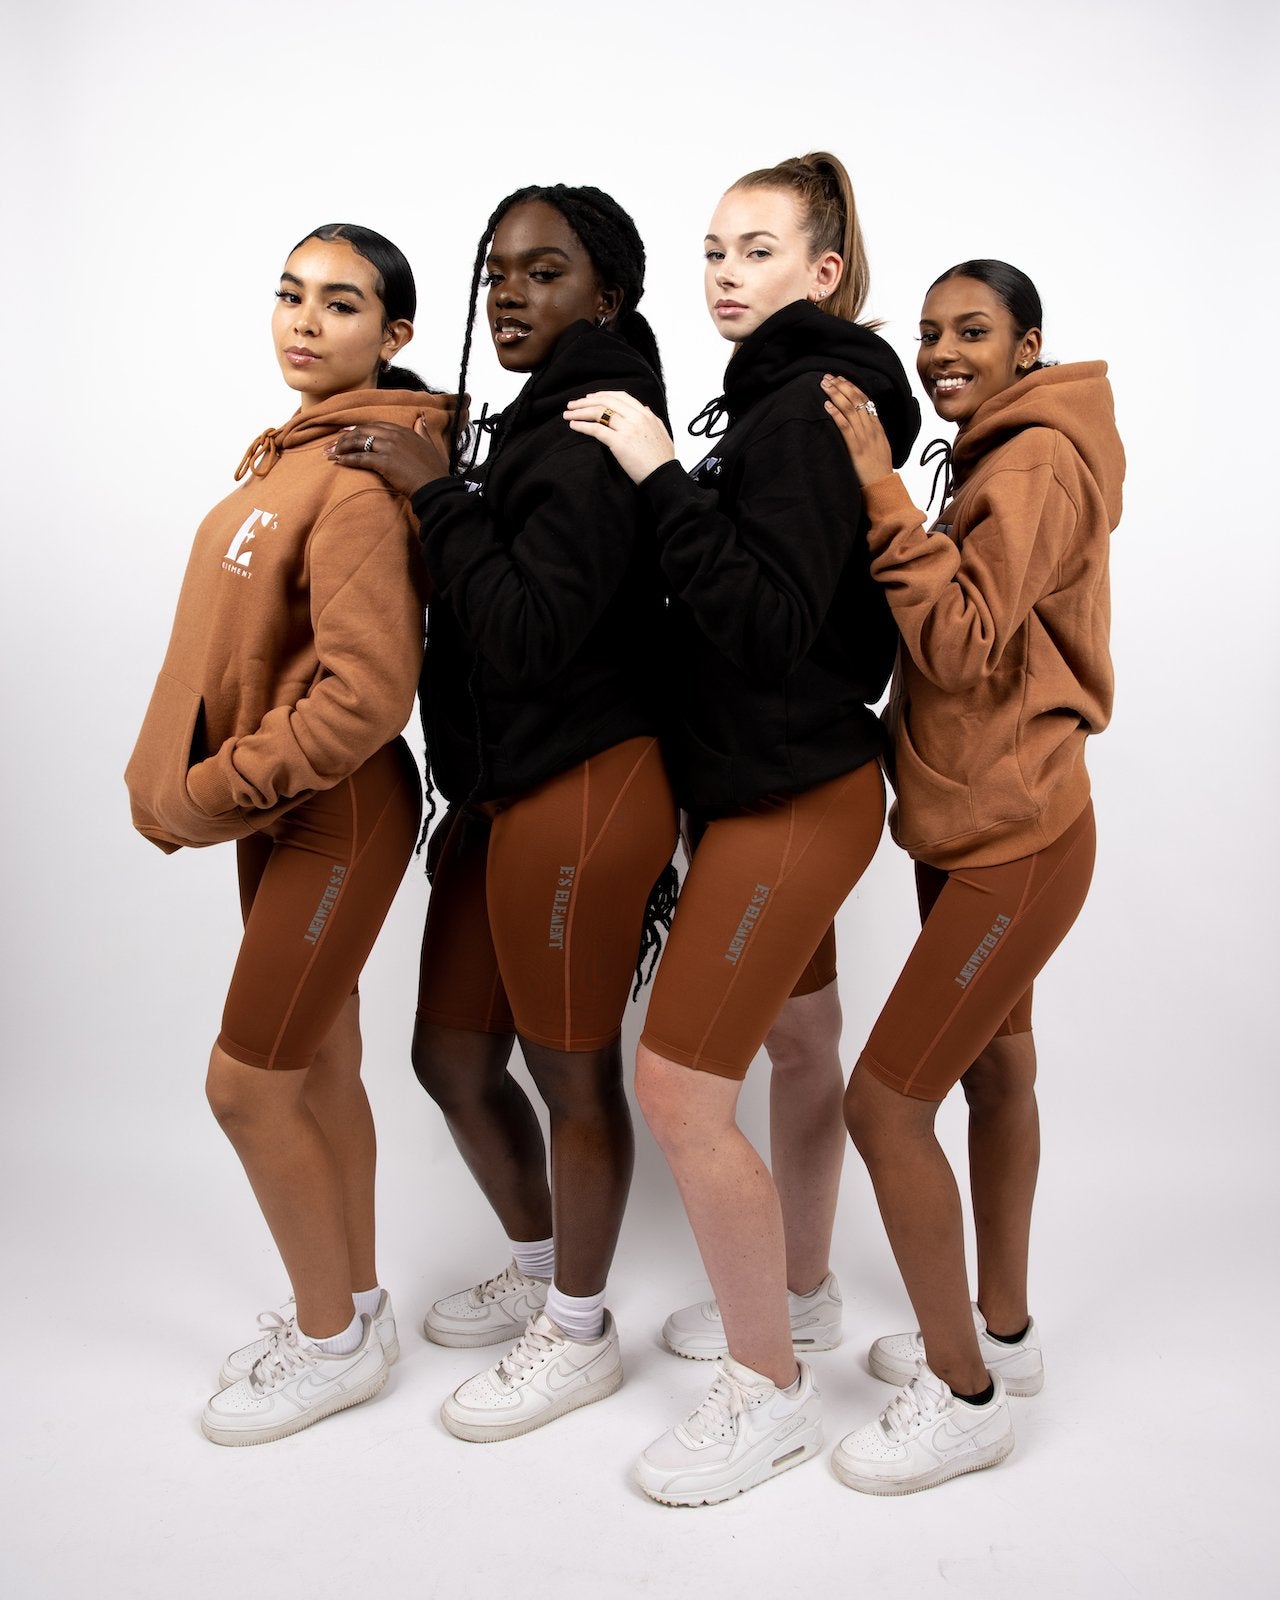 The models on the left and right are wearing brown hoodies. The two models in the middle are wearing black hoodies. All four models are wearing brown biker shorts and white sneakers. The Ella Shaping Cycling Shorts (Petite Size) by E's Element.